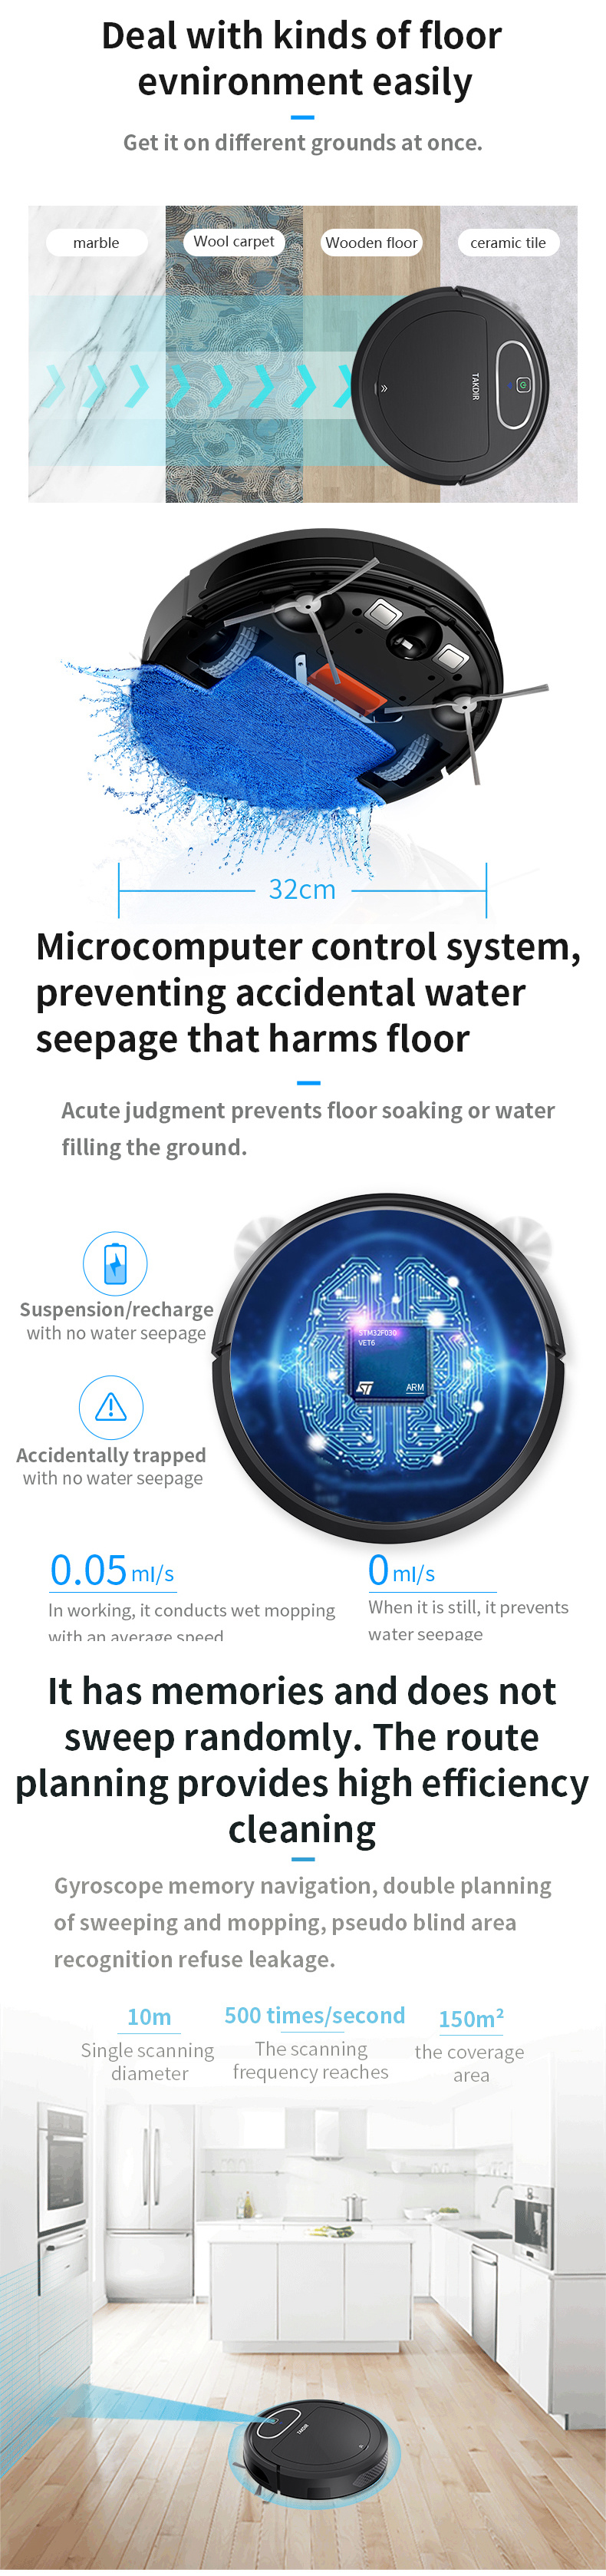 Robot Vacuum Cleaner, Wi-Fi Connected, 2 Boundary Strips, Cleans for Carpets and Pet Hair, Voice Control, Compatible with Alexa and Google Home